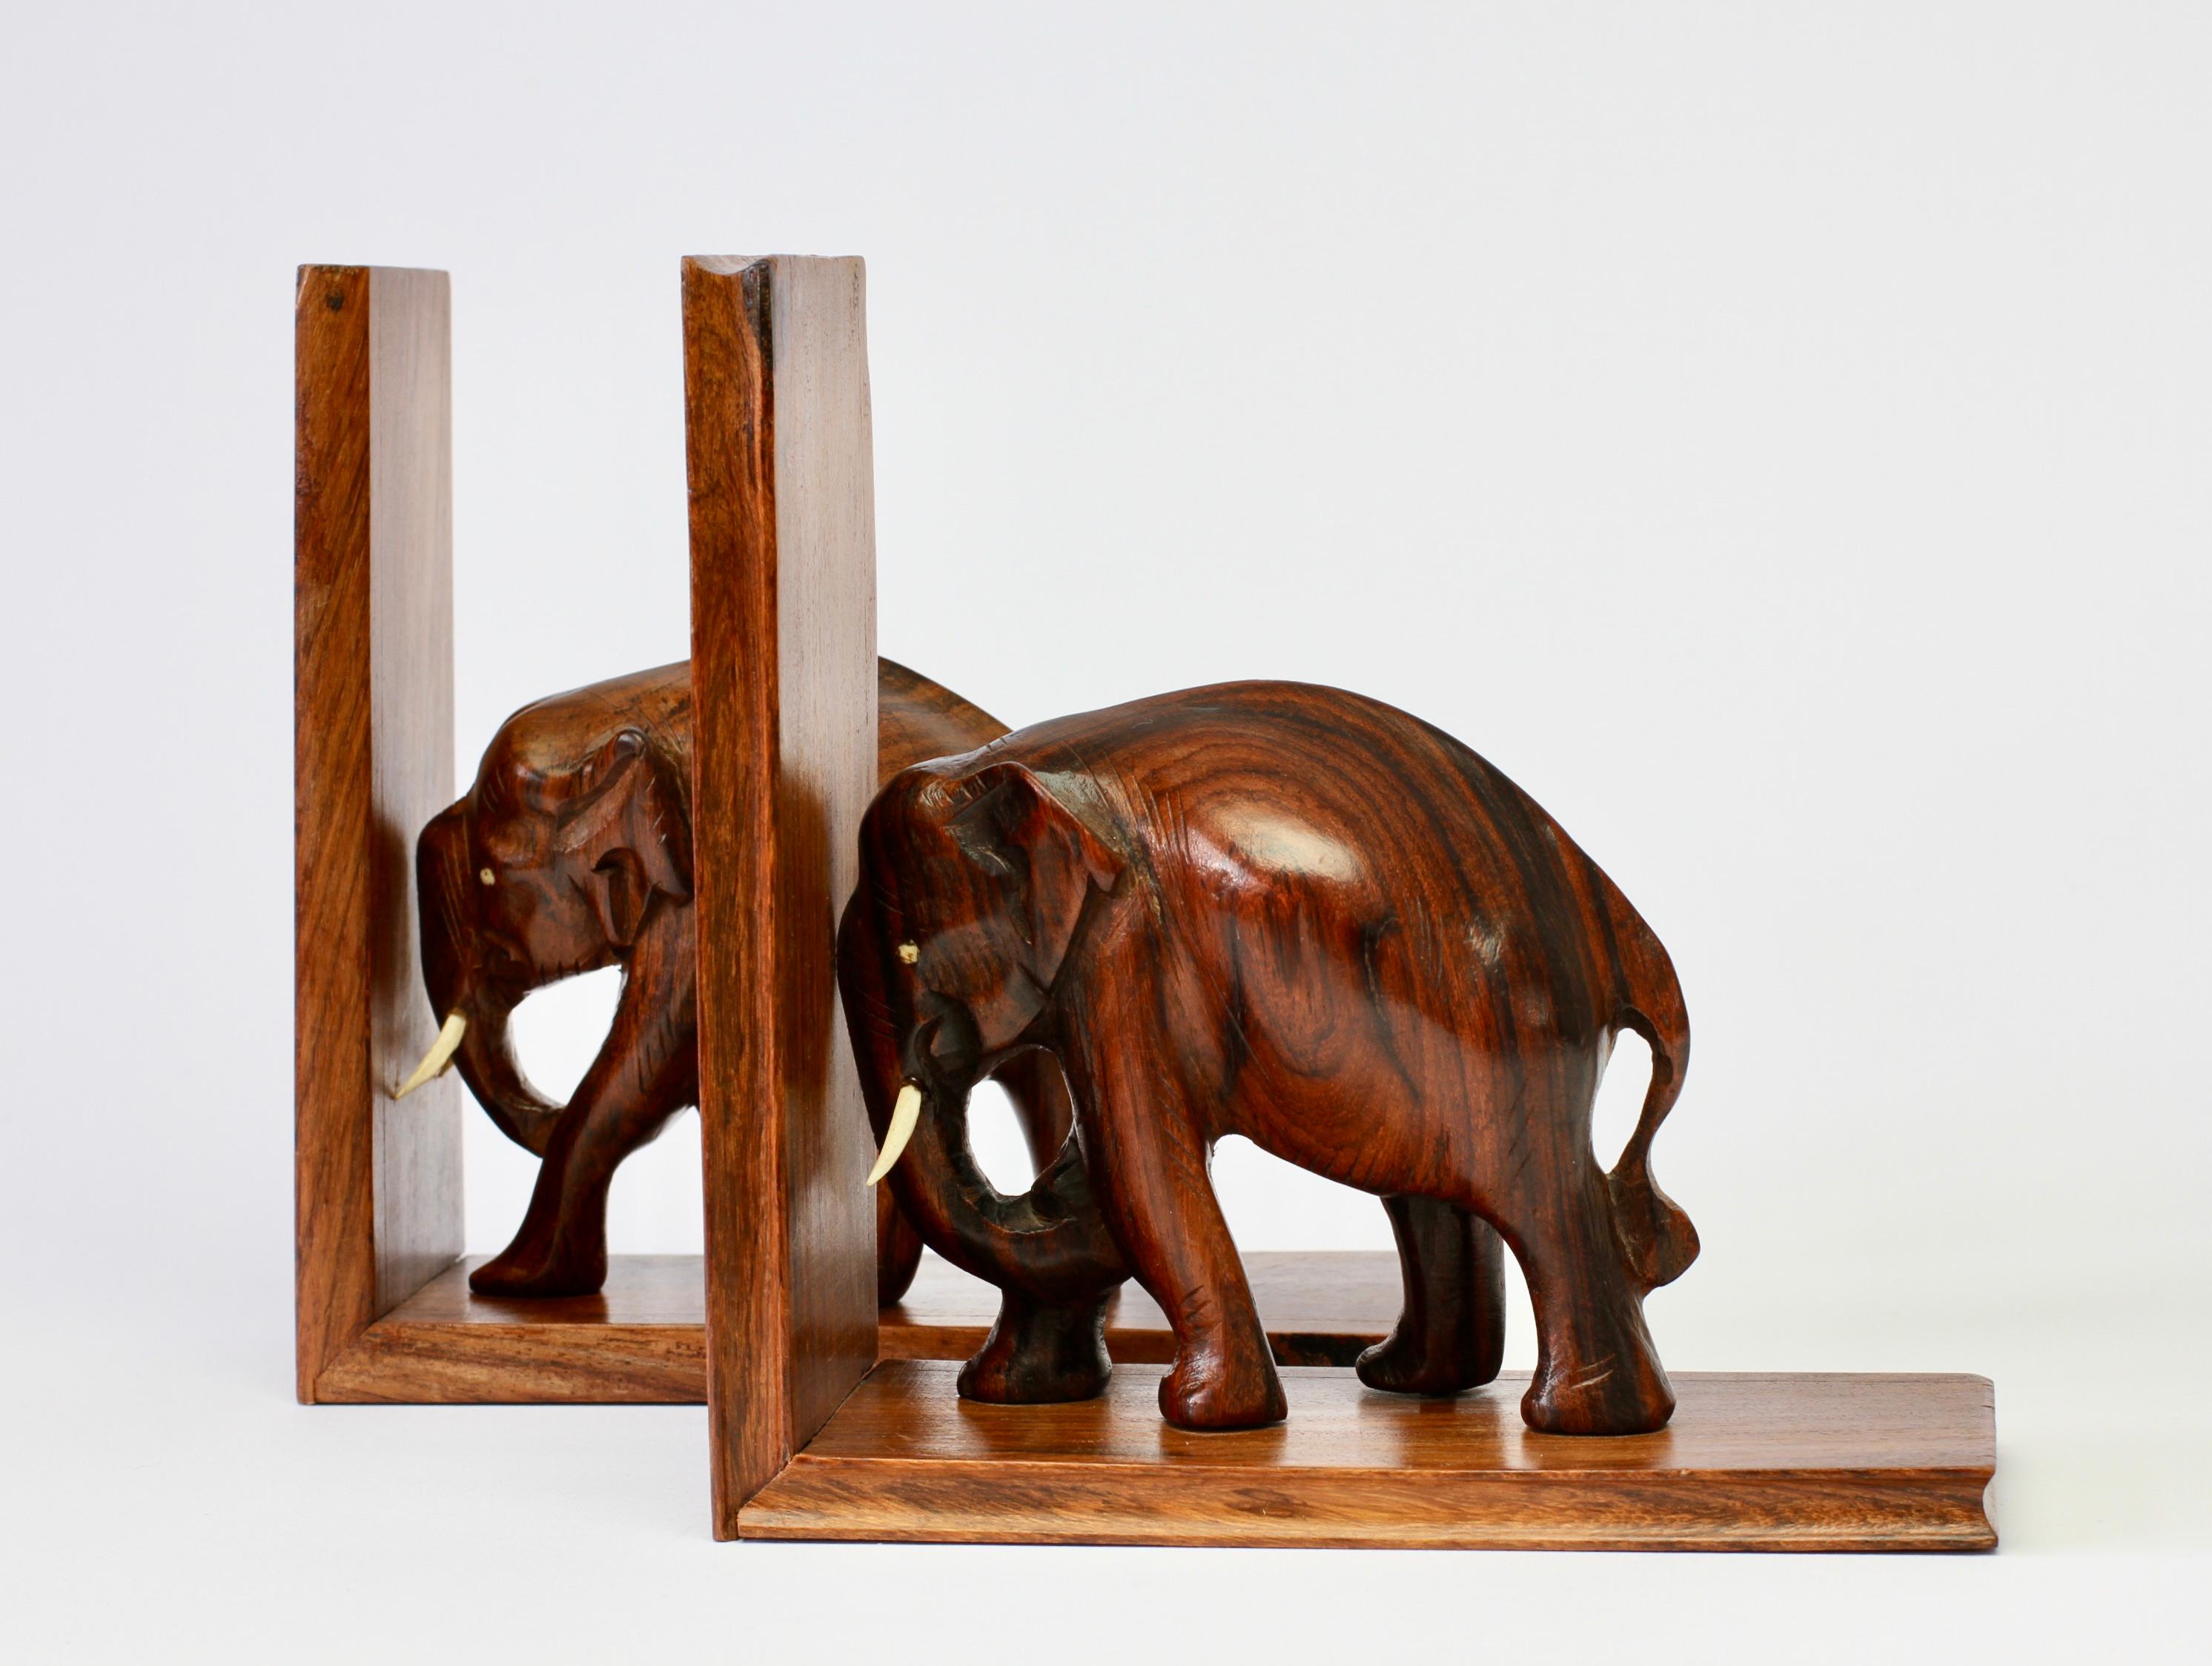 Hand Carved Wooden Book Ends with Elephant Sculptures / Figures, circa 1960s 5